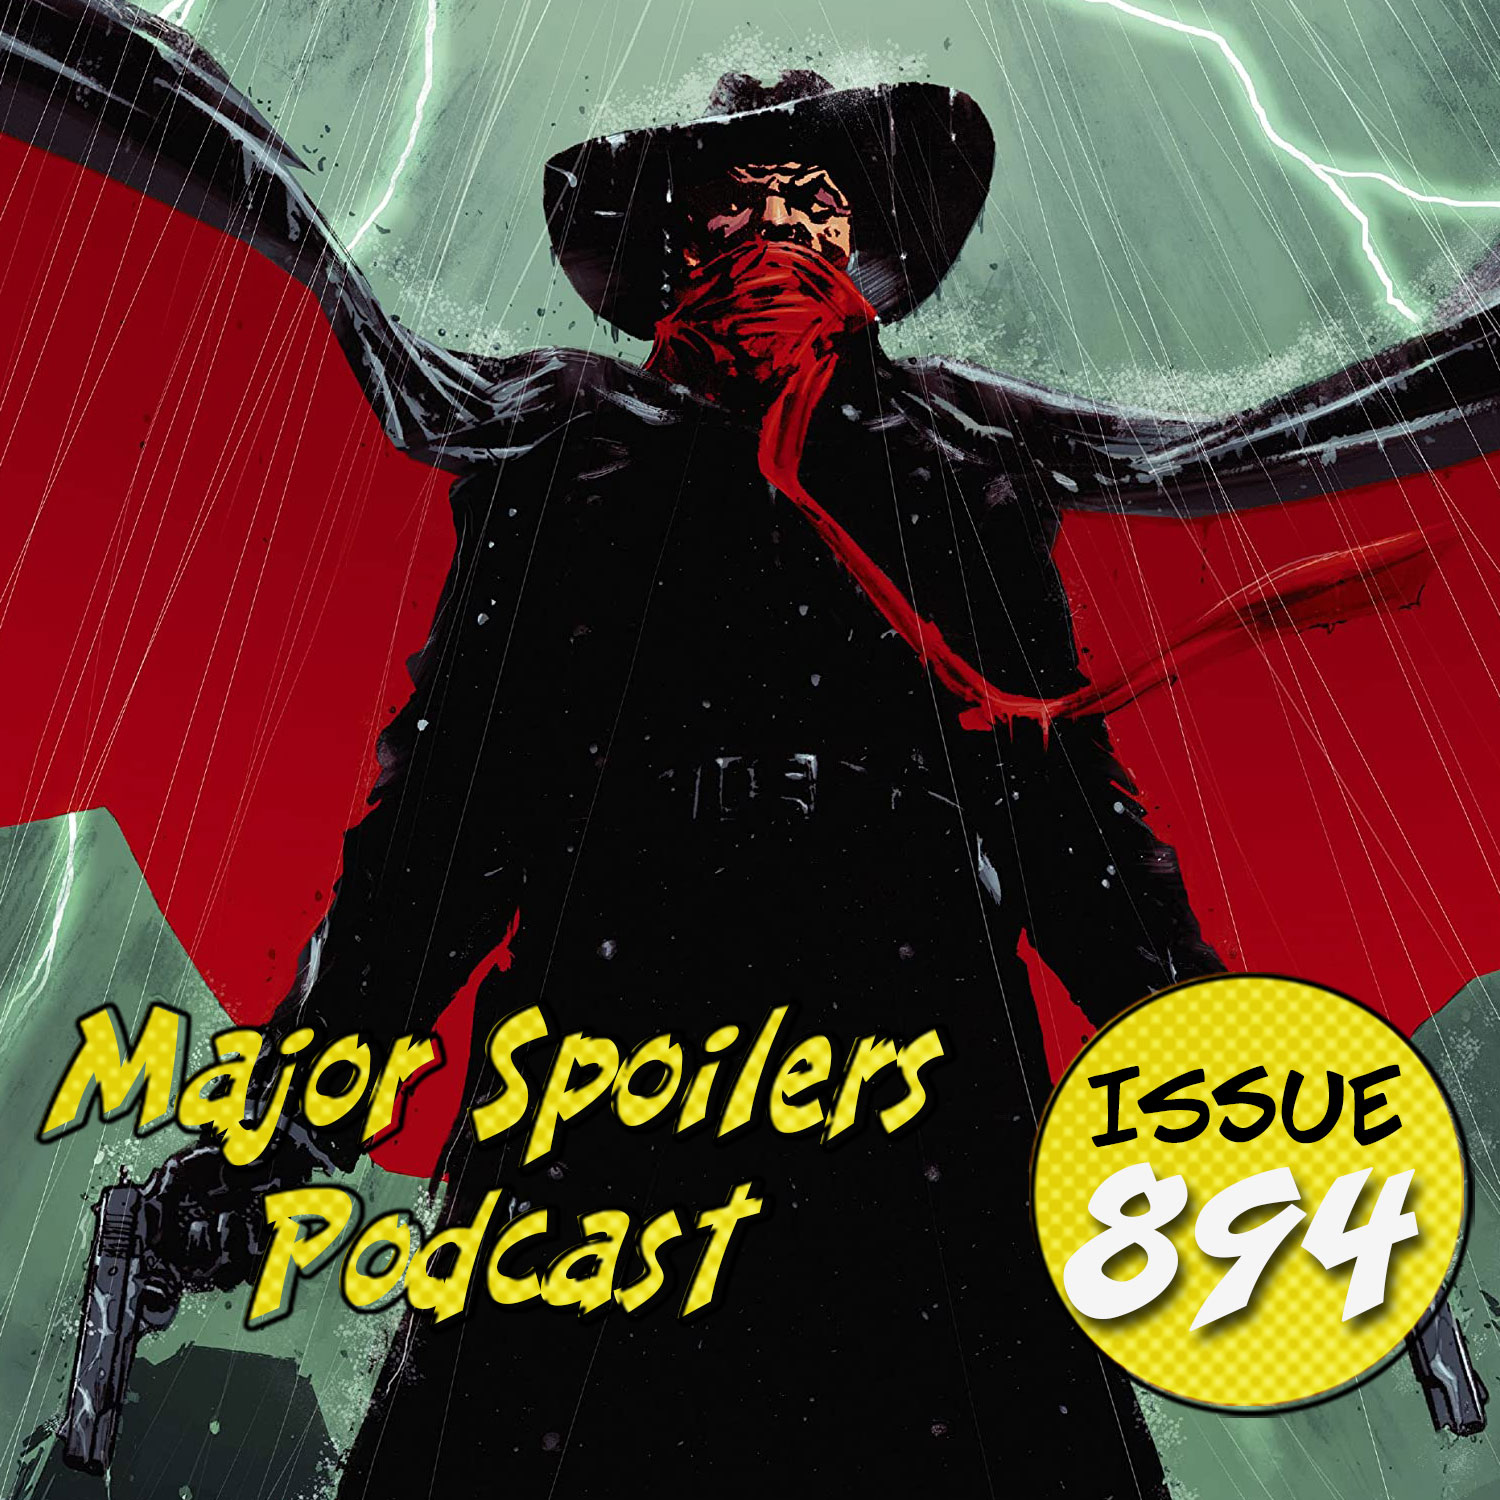 Major Spoilers Podcast #894: The Shadow: The Last Illusion